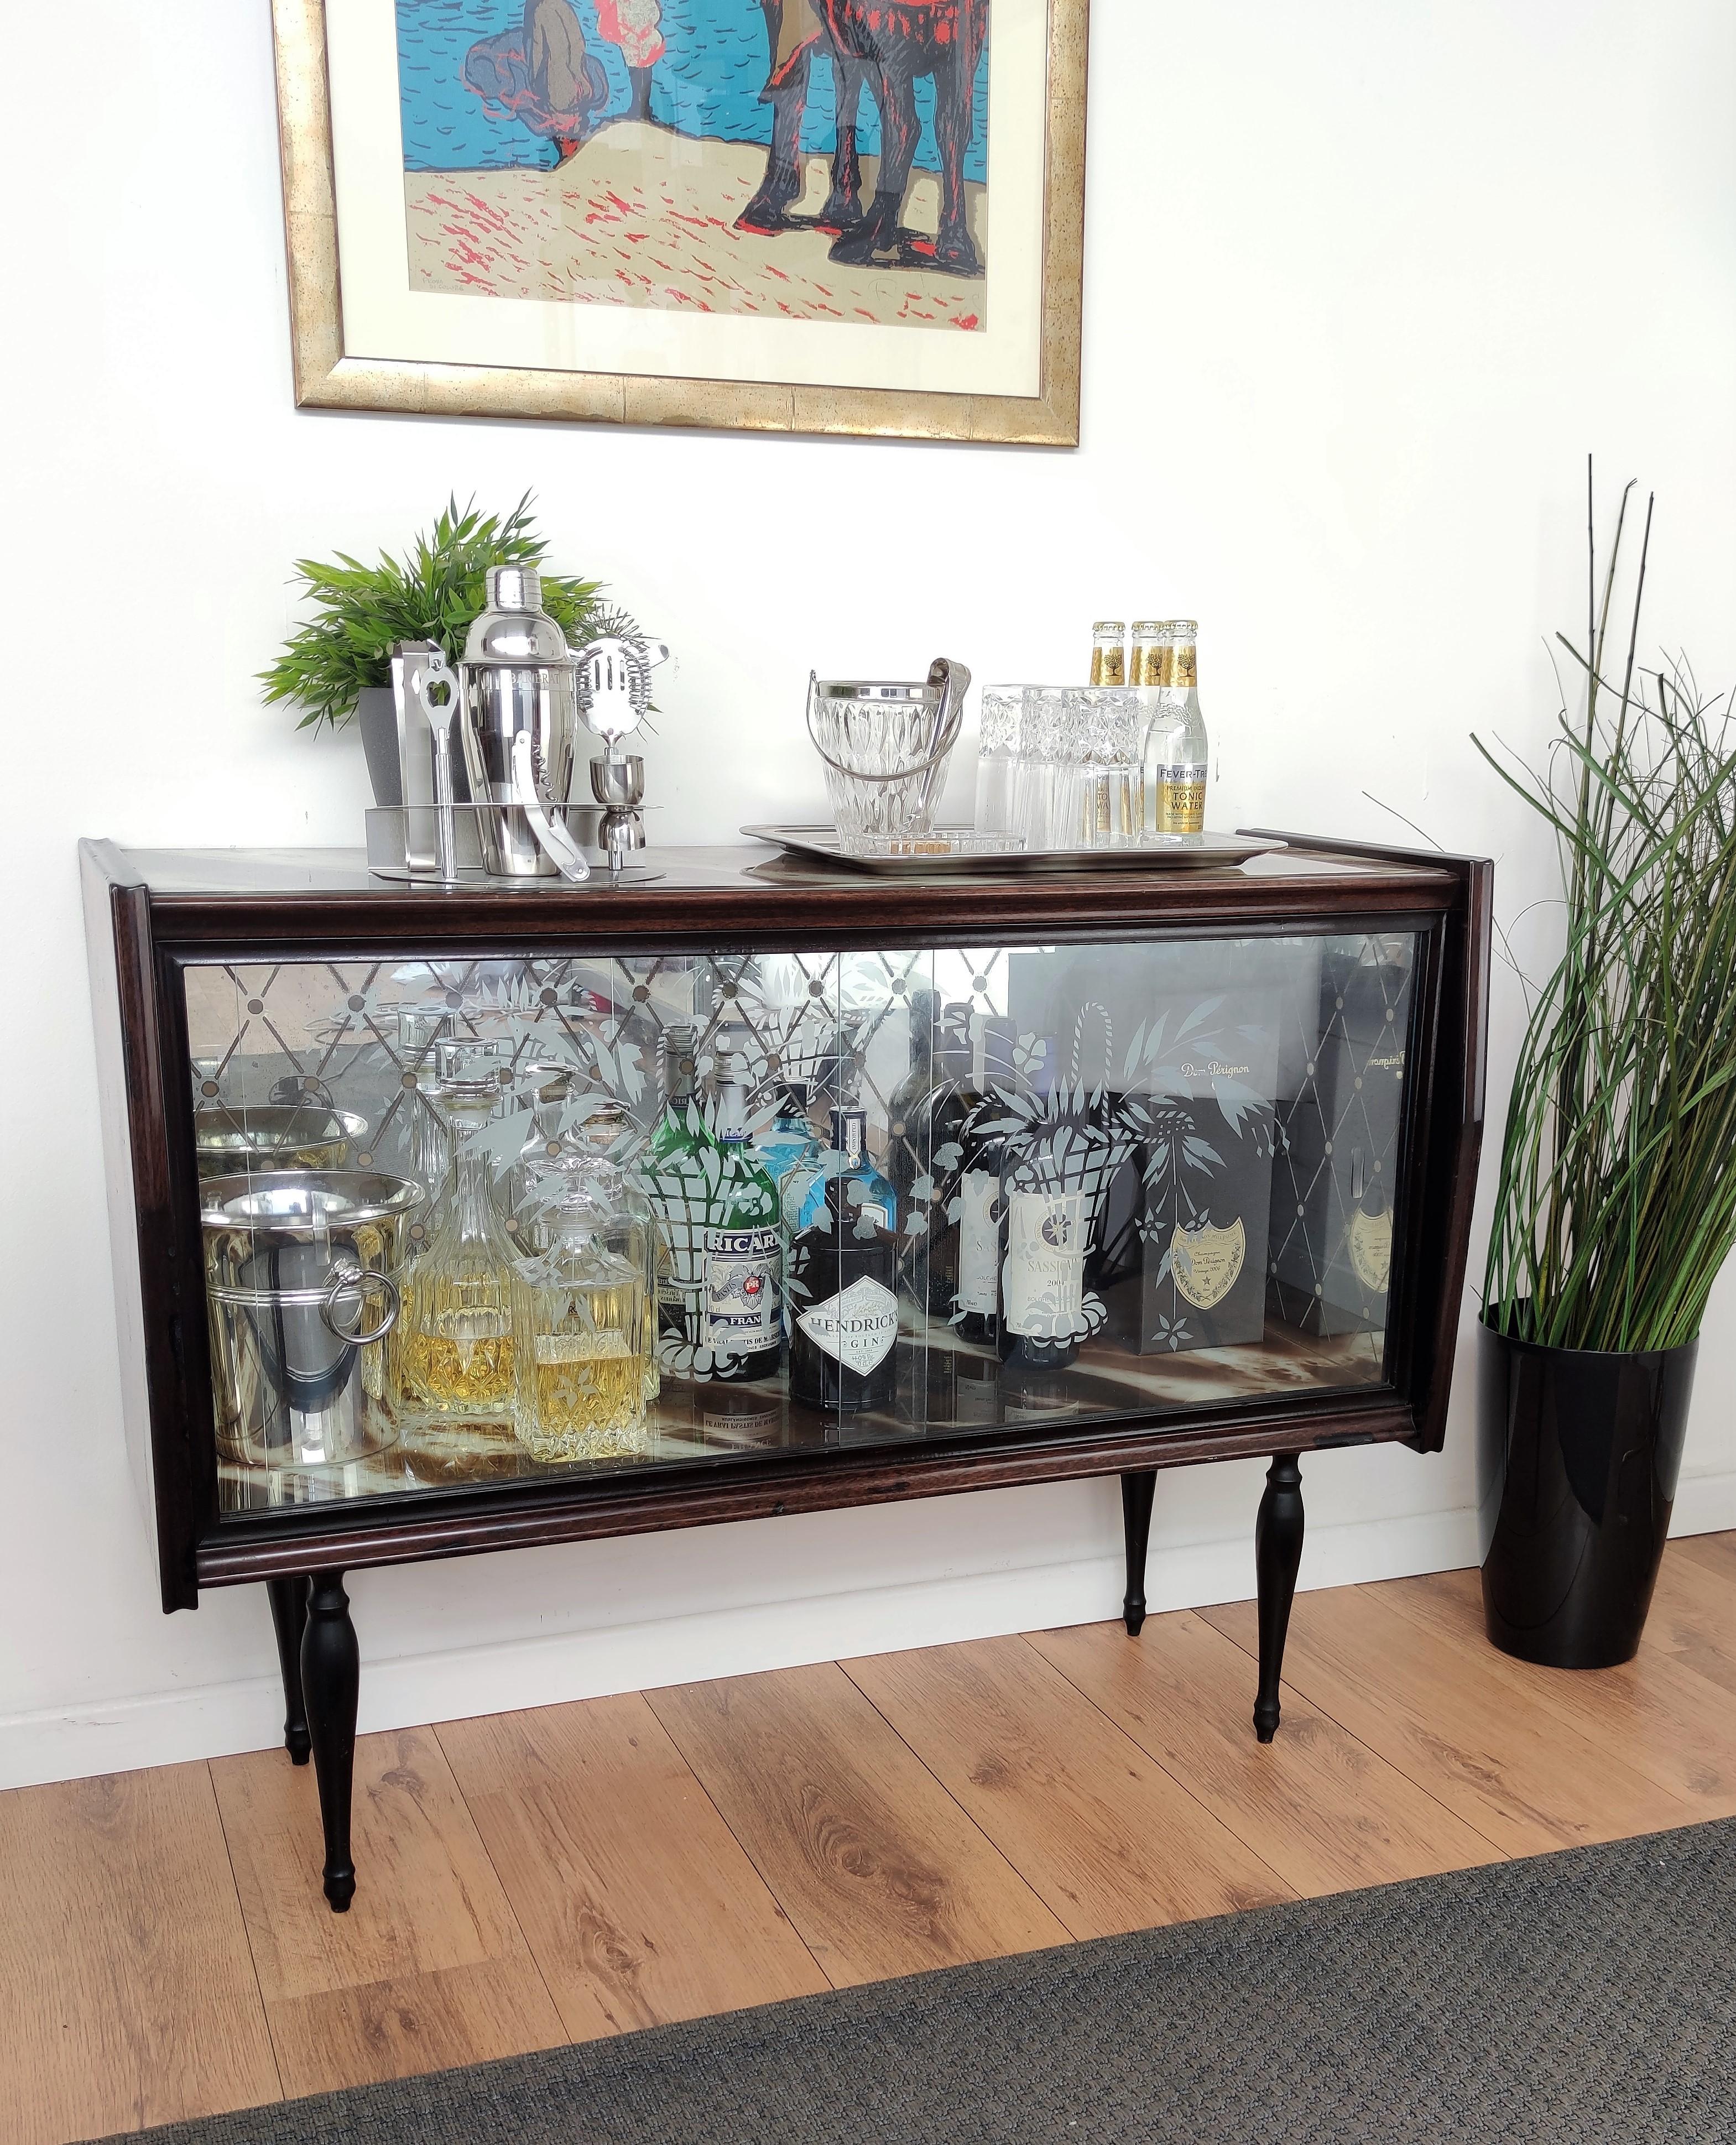 Very elegant Italian Art Deco Mid-Century Modern dry bar cabinet, in beautiful wood with sliding glass double front door and amazing interior part in mirrors mosaic with brown marble-style glass bottom shelf and top. The internal mirrors have small